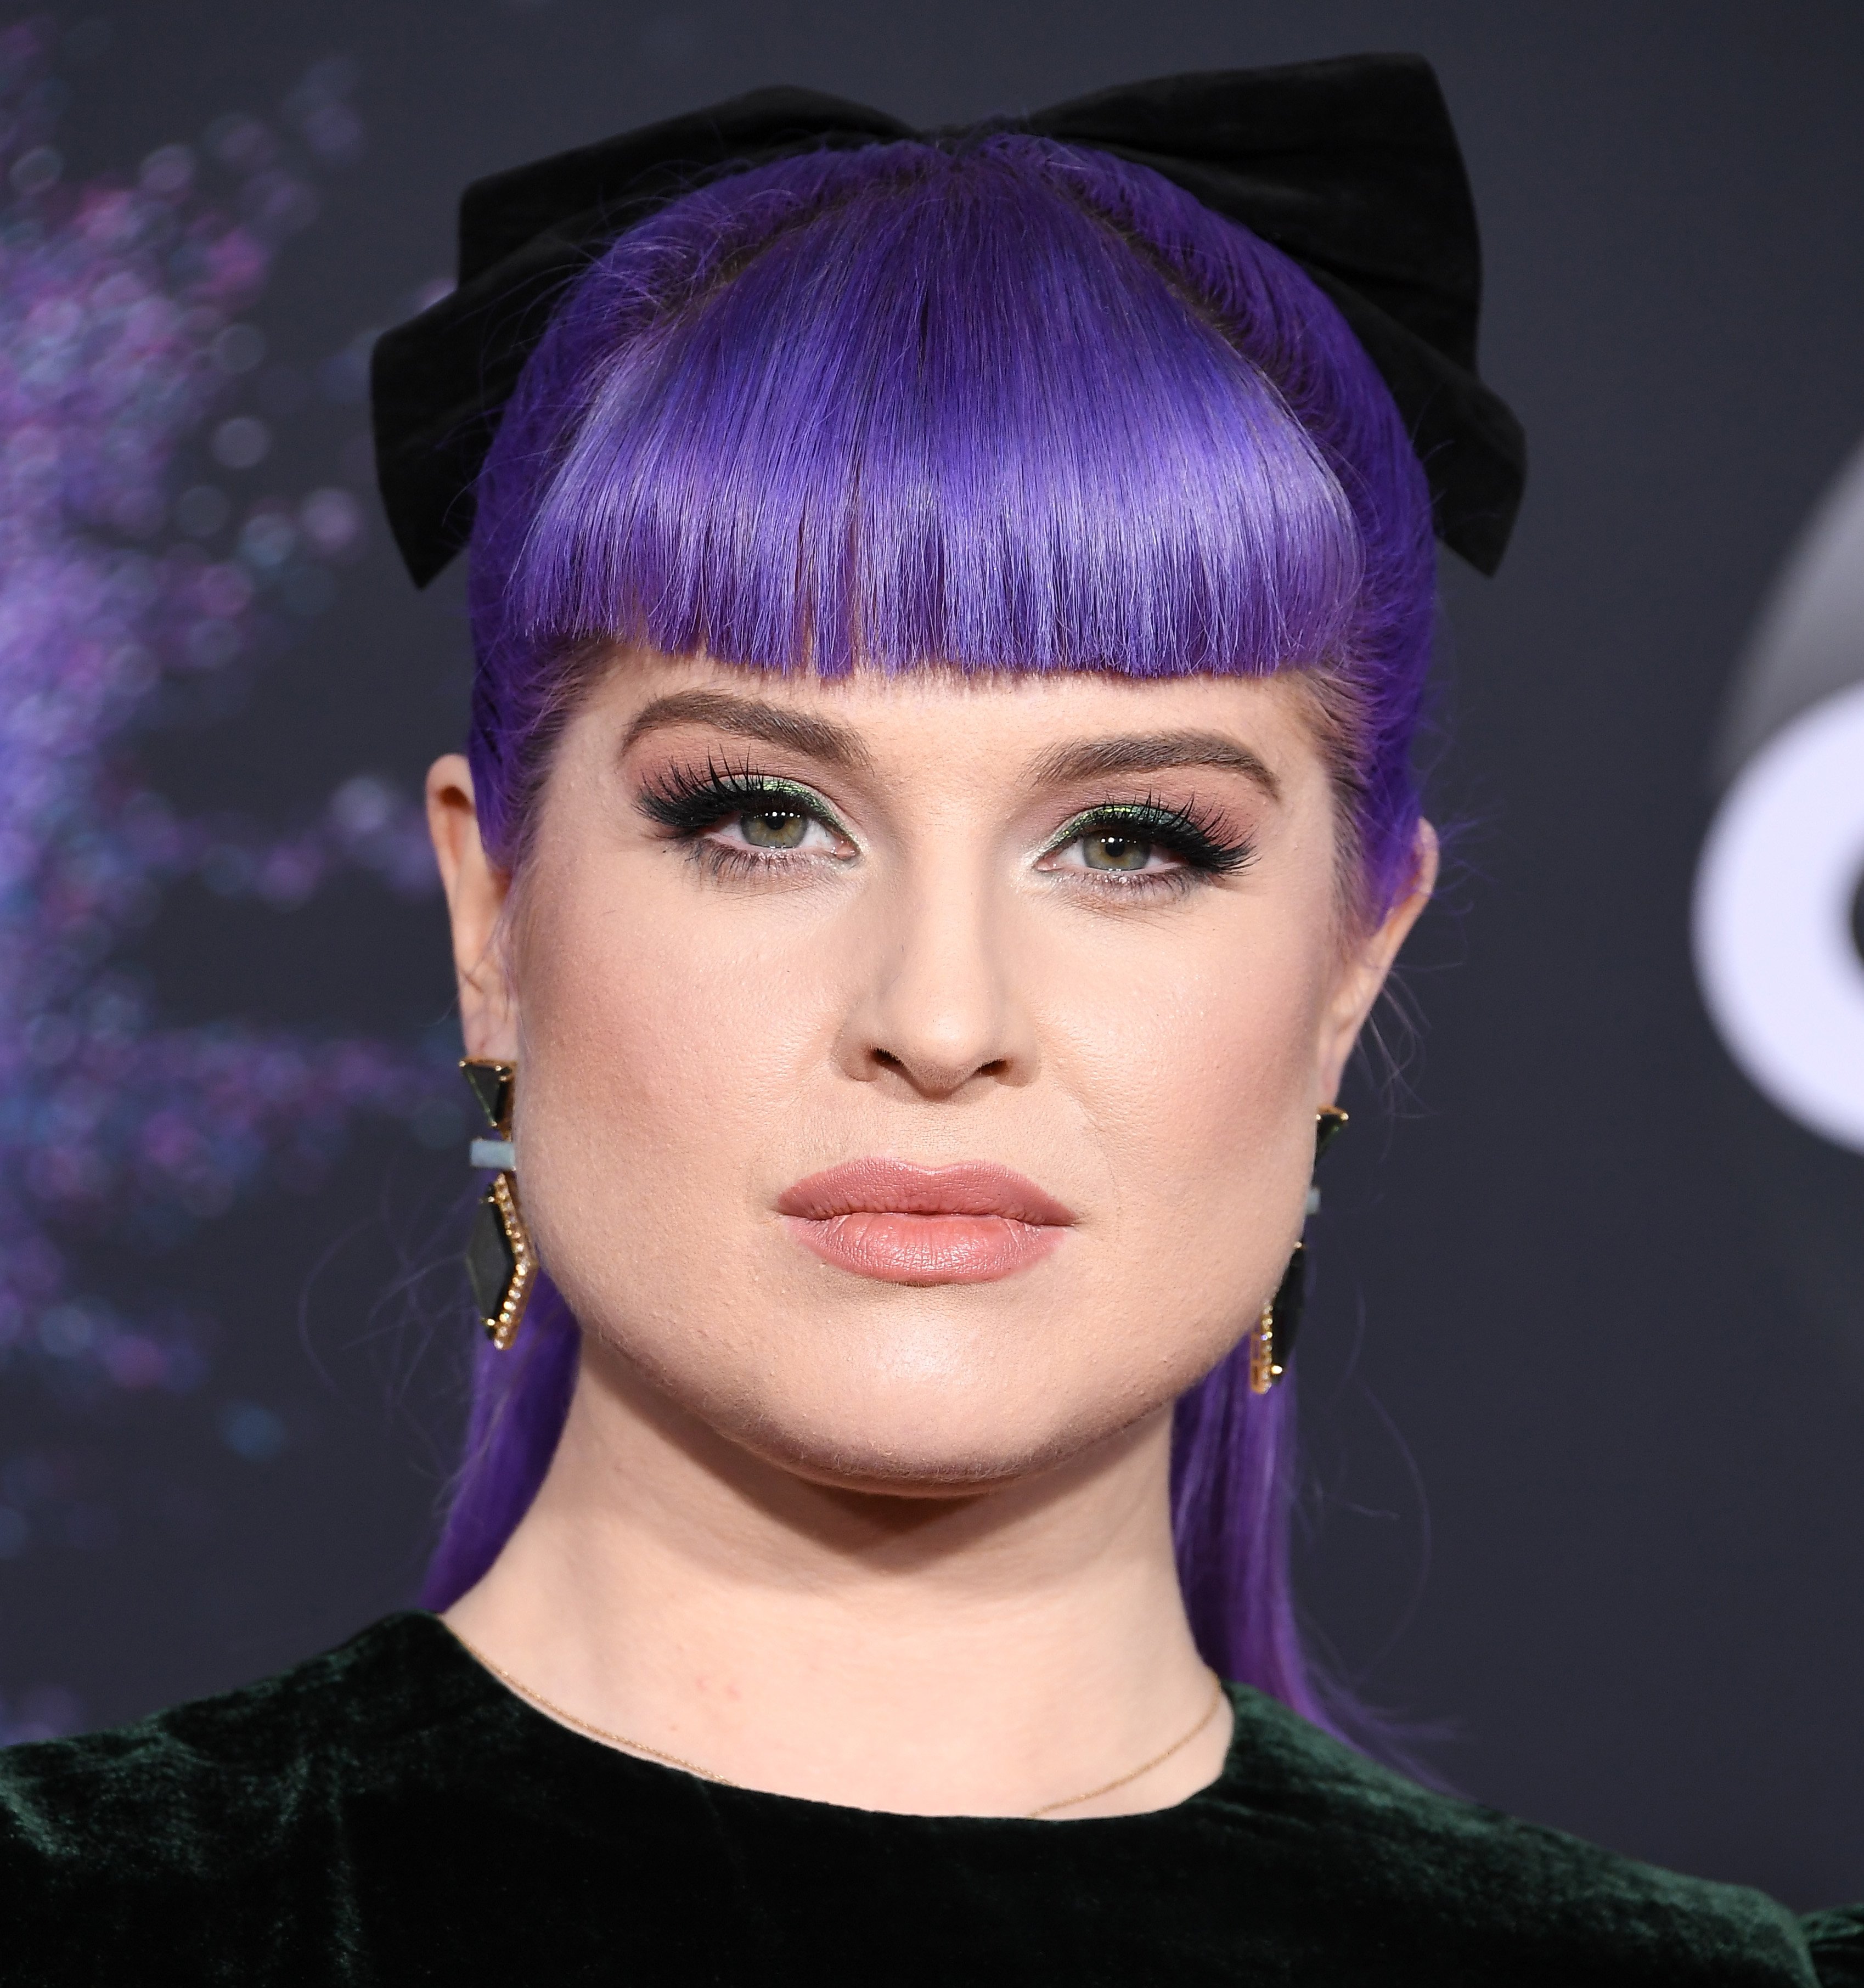 Kelly Osbourne arrives at the 2019 American Music Awards on November 24, 2019 in Los Angeles, California | Photo: Getty Images